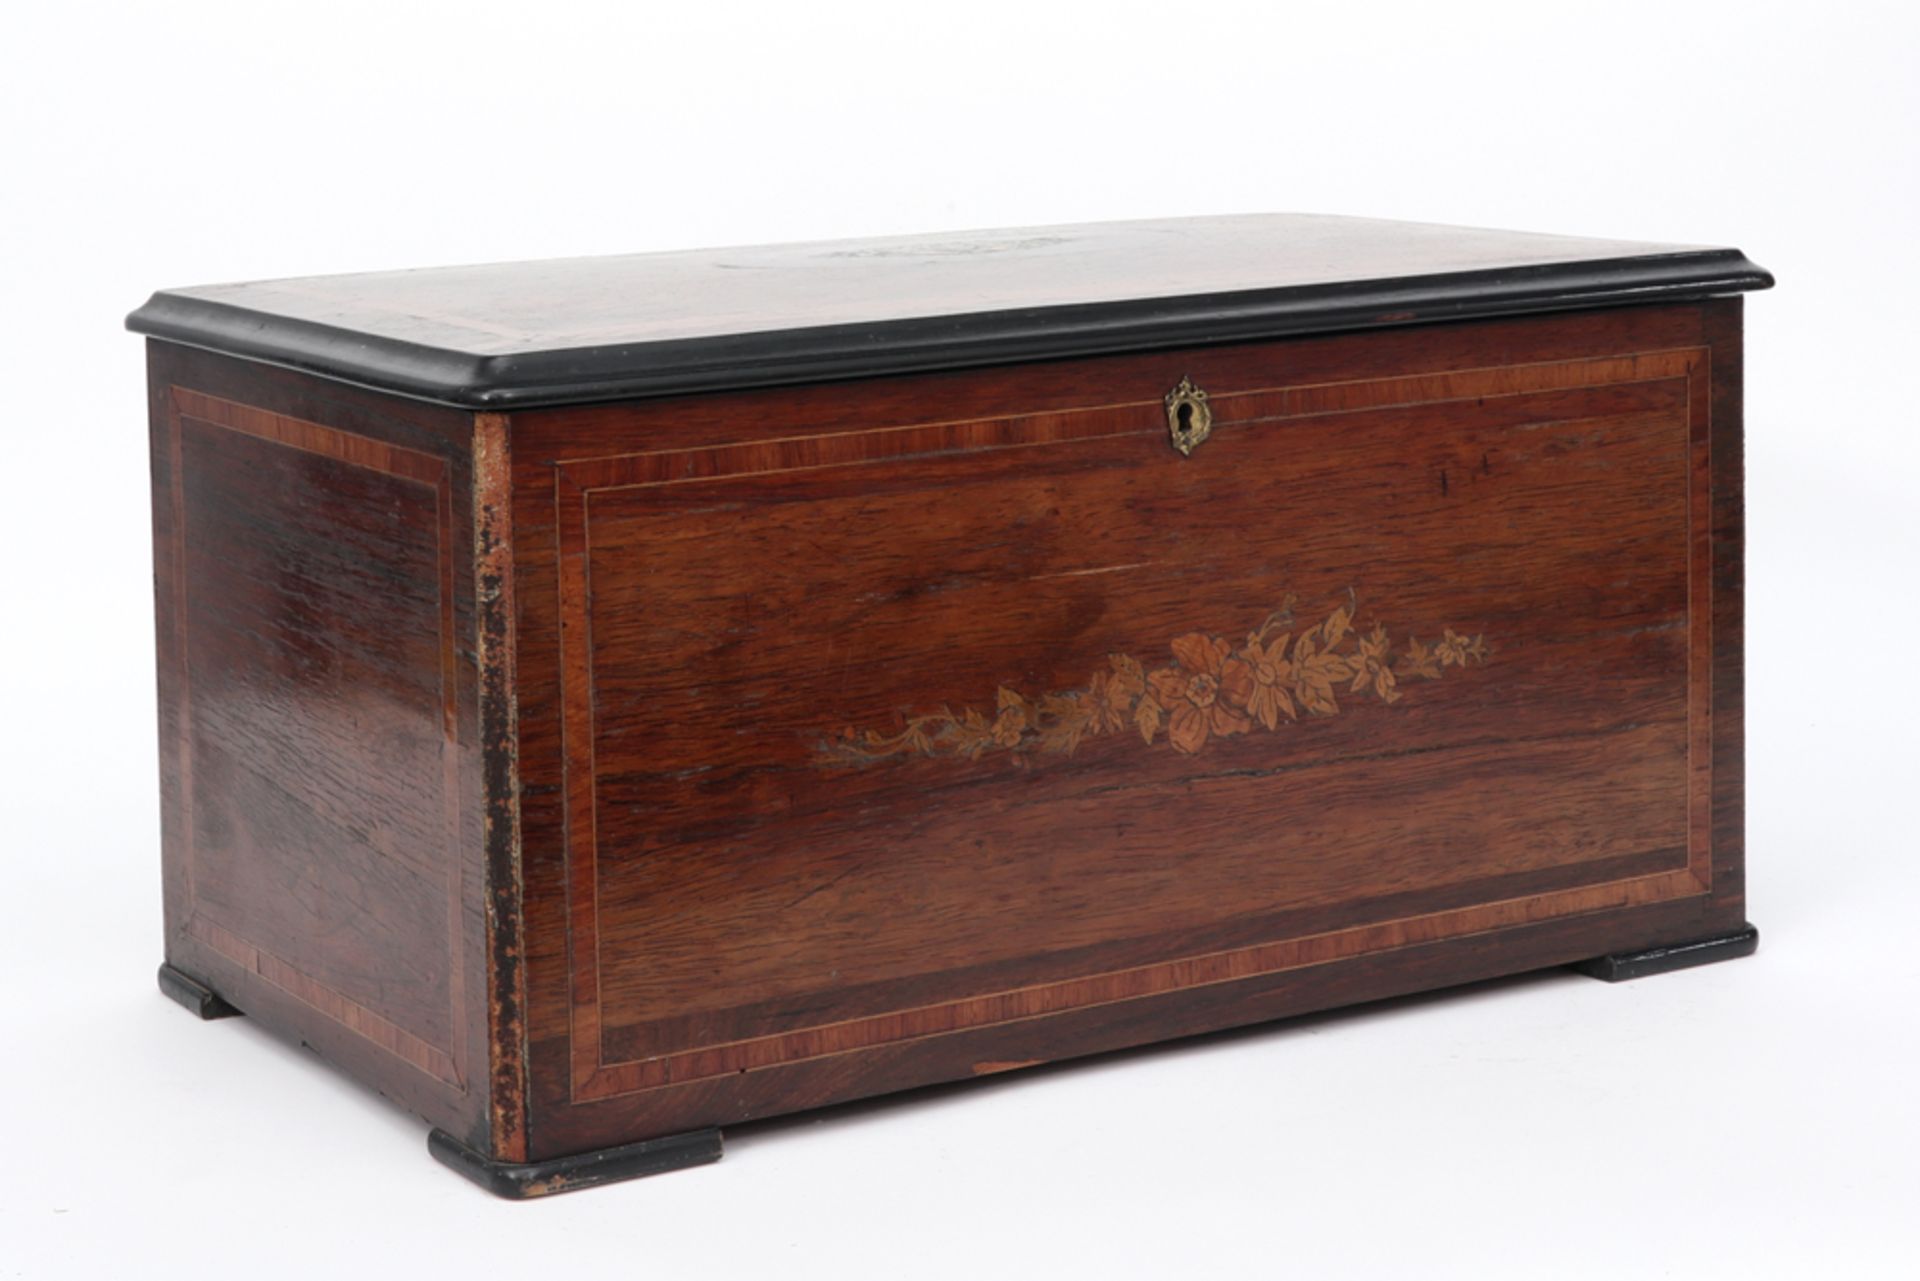 antique "Fabrique de Genève" marked musical box with case in rose-wood and marquetry - with six